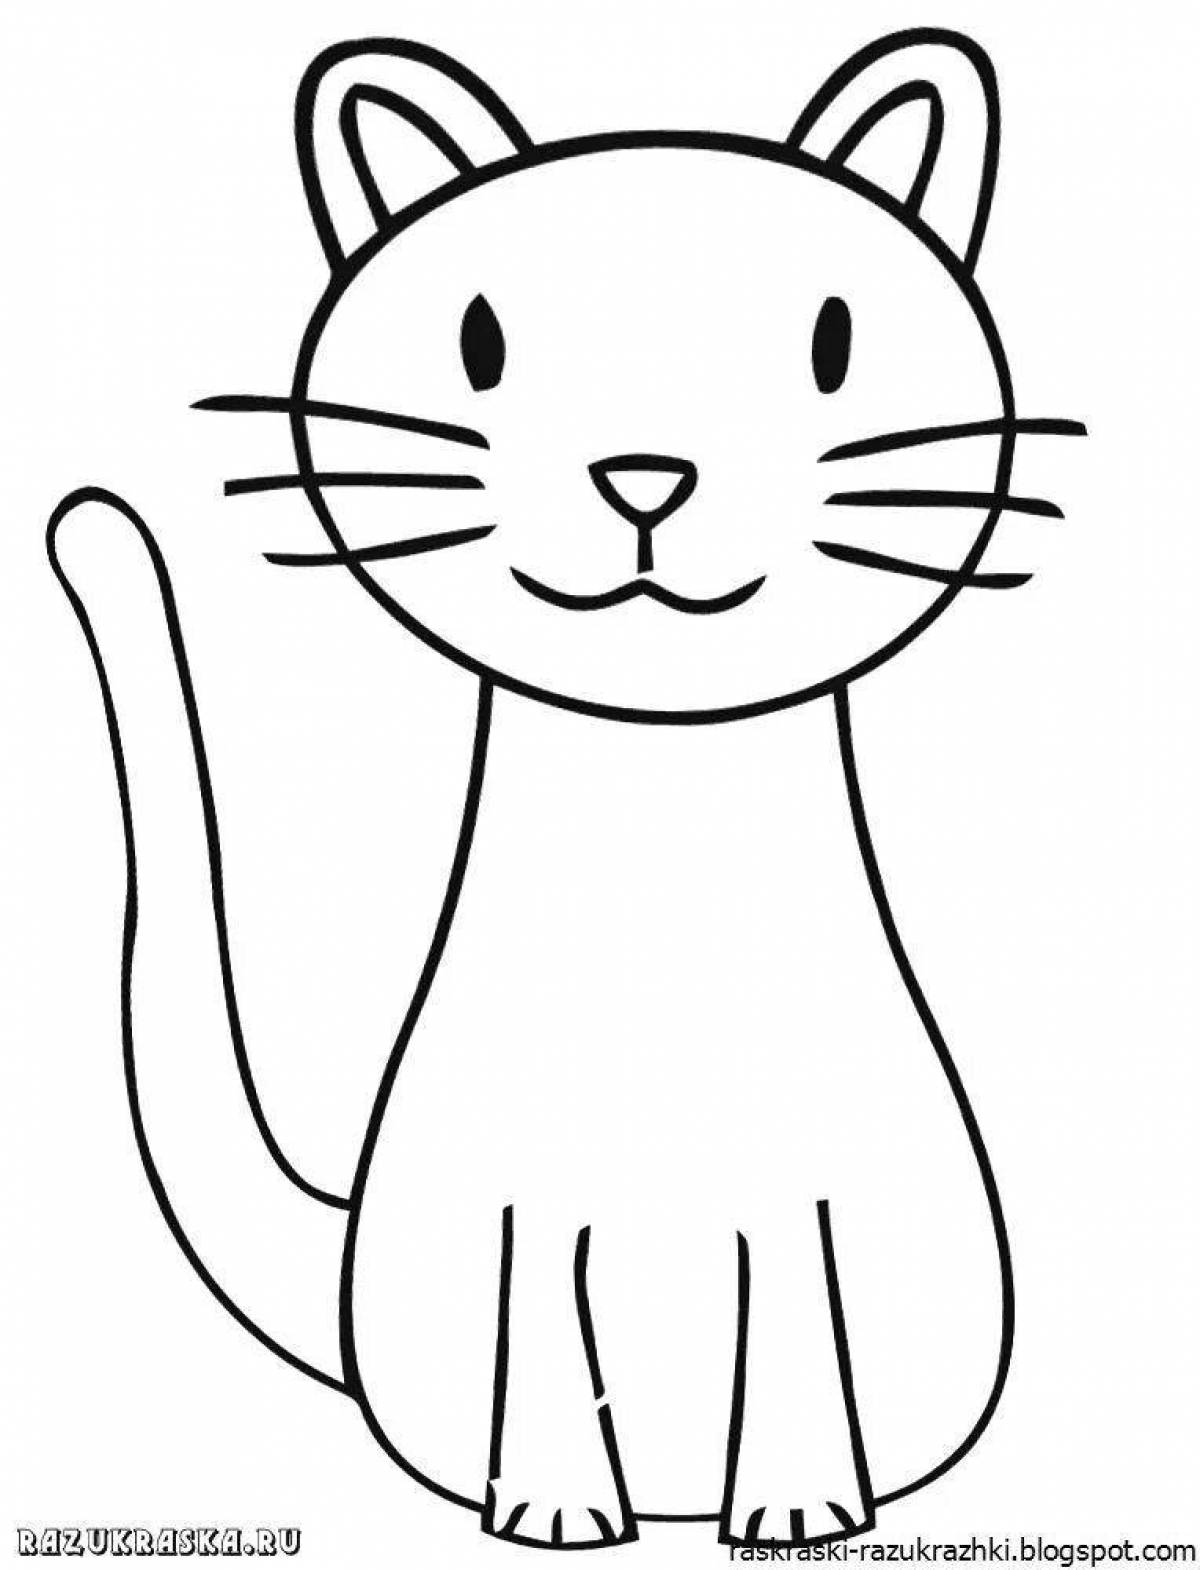 Colorful kitten coloring book for 3-4 year olds